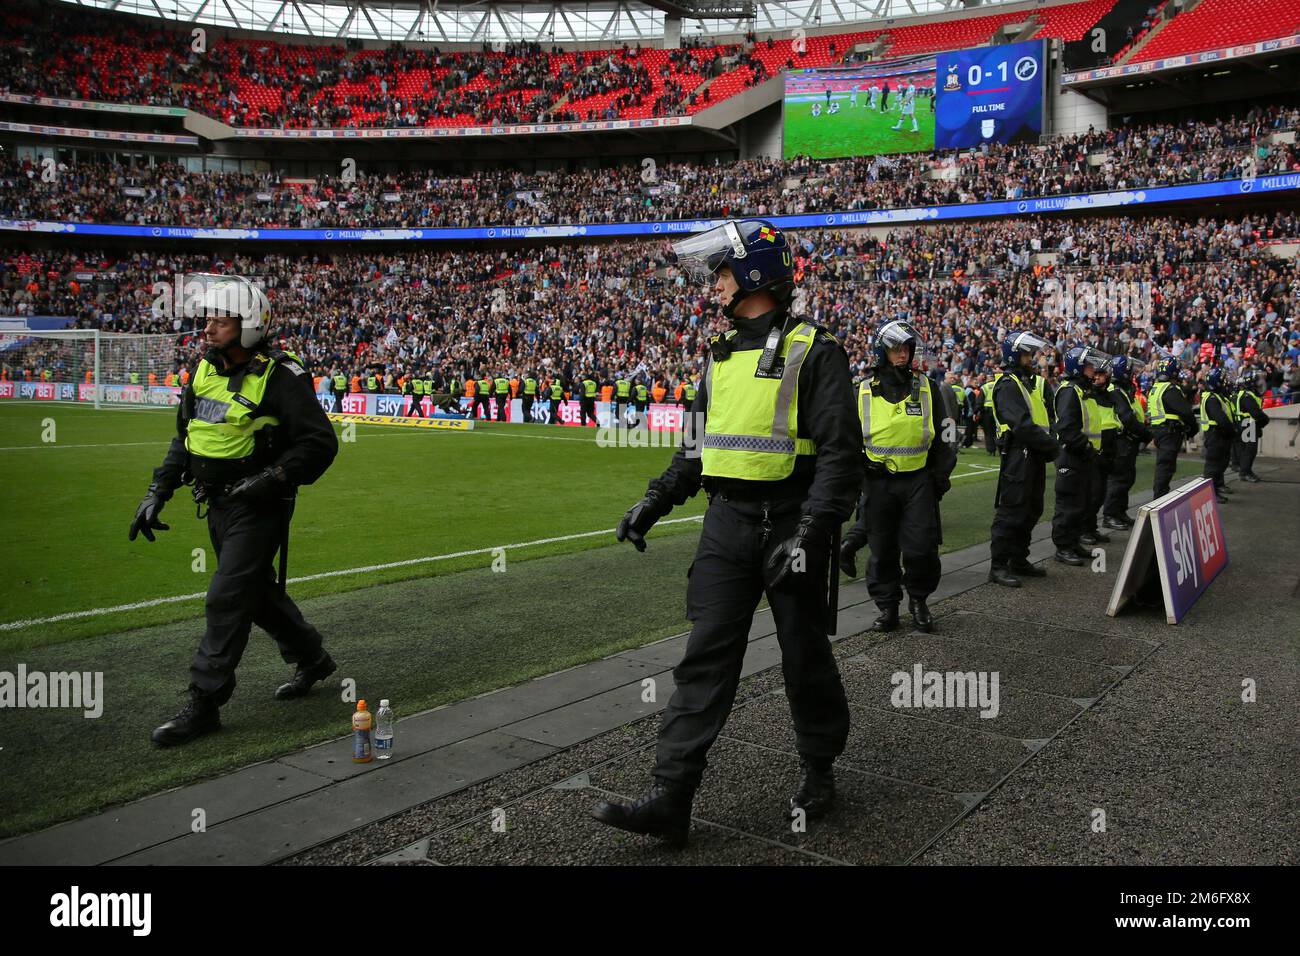 Millwall's Charge for the Championship Play-offs